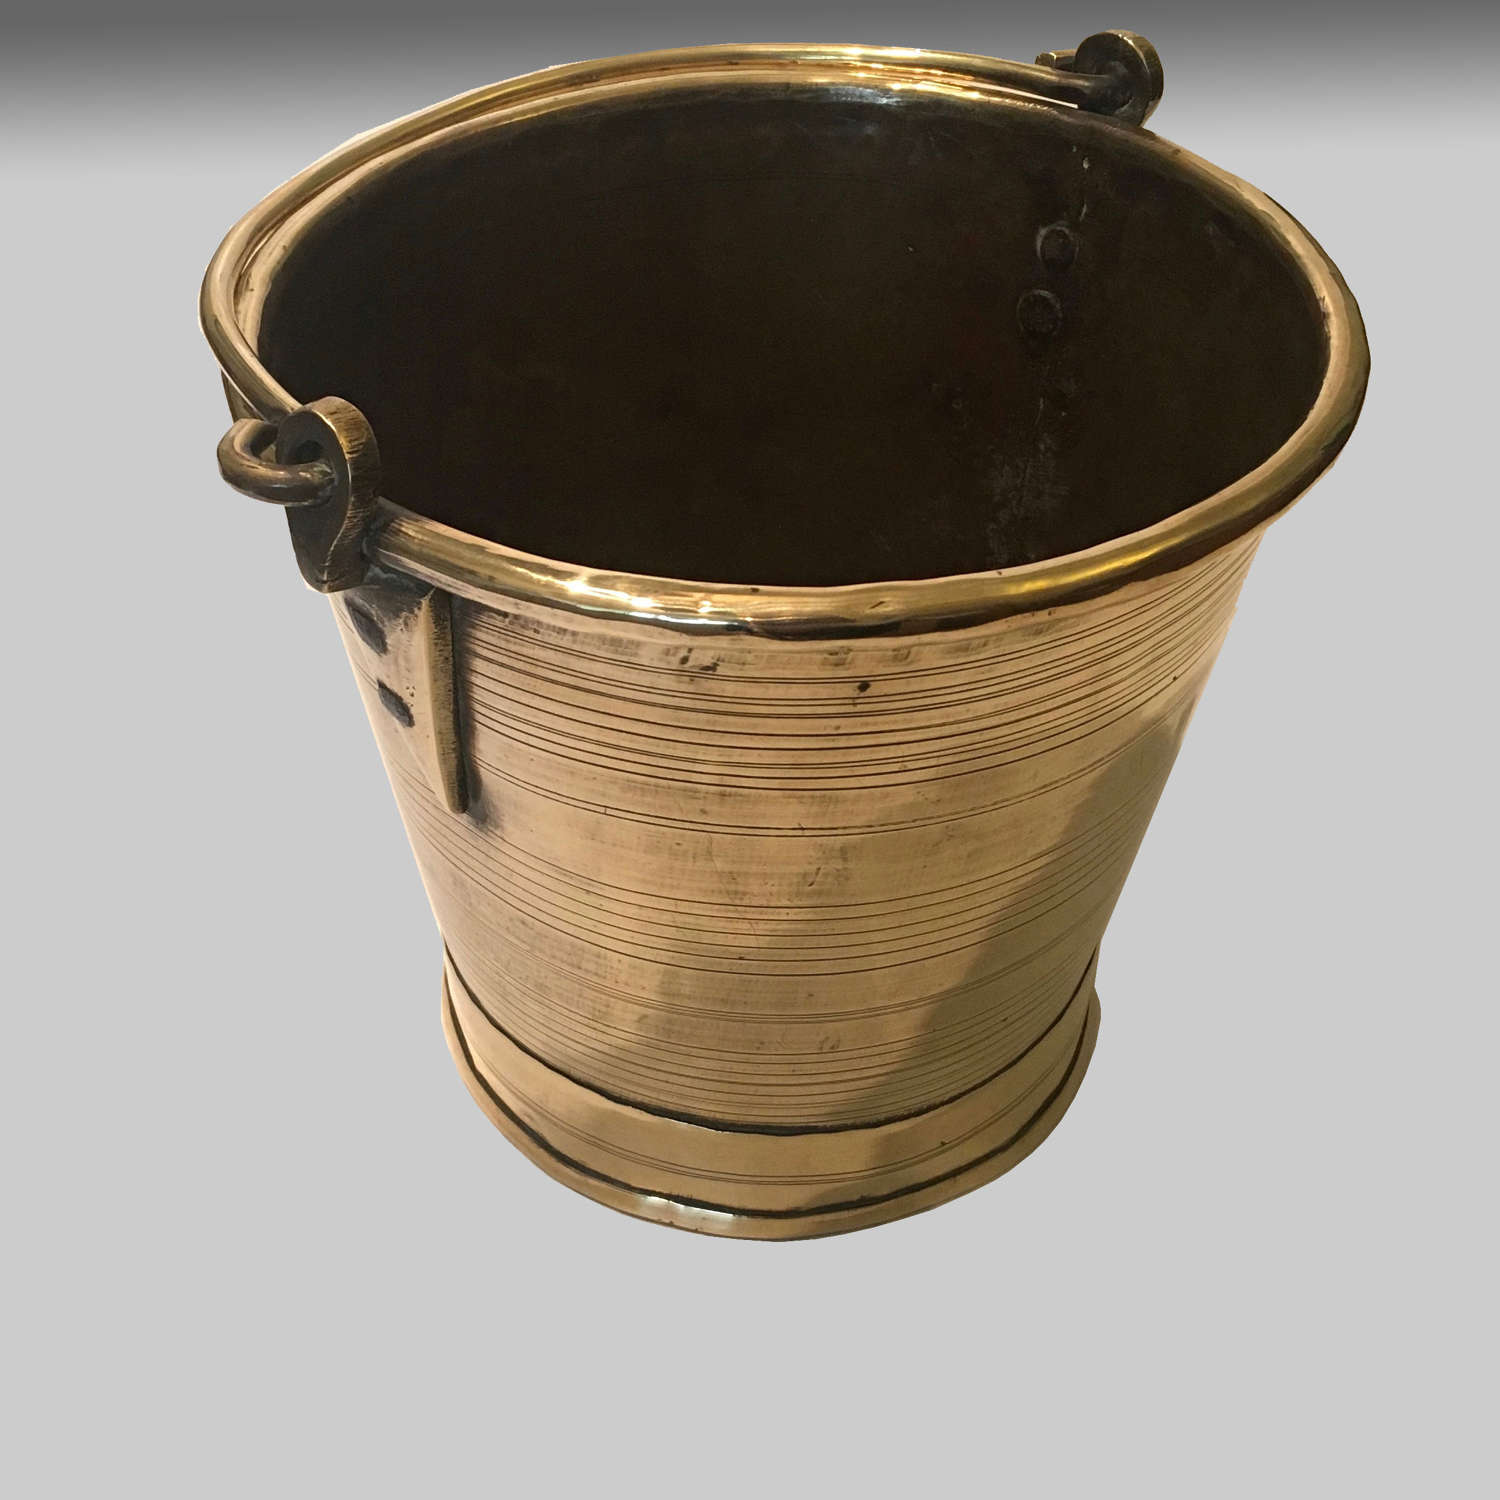 19th century Anglo-Indian brass campaign bucket